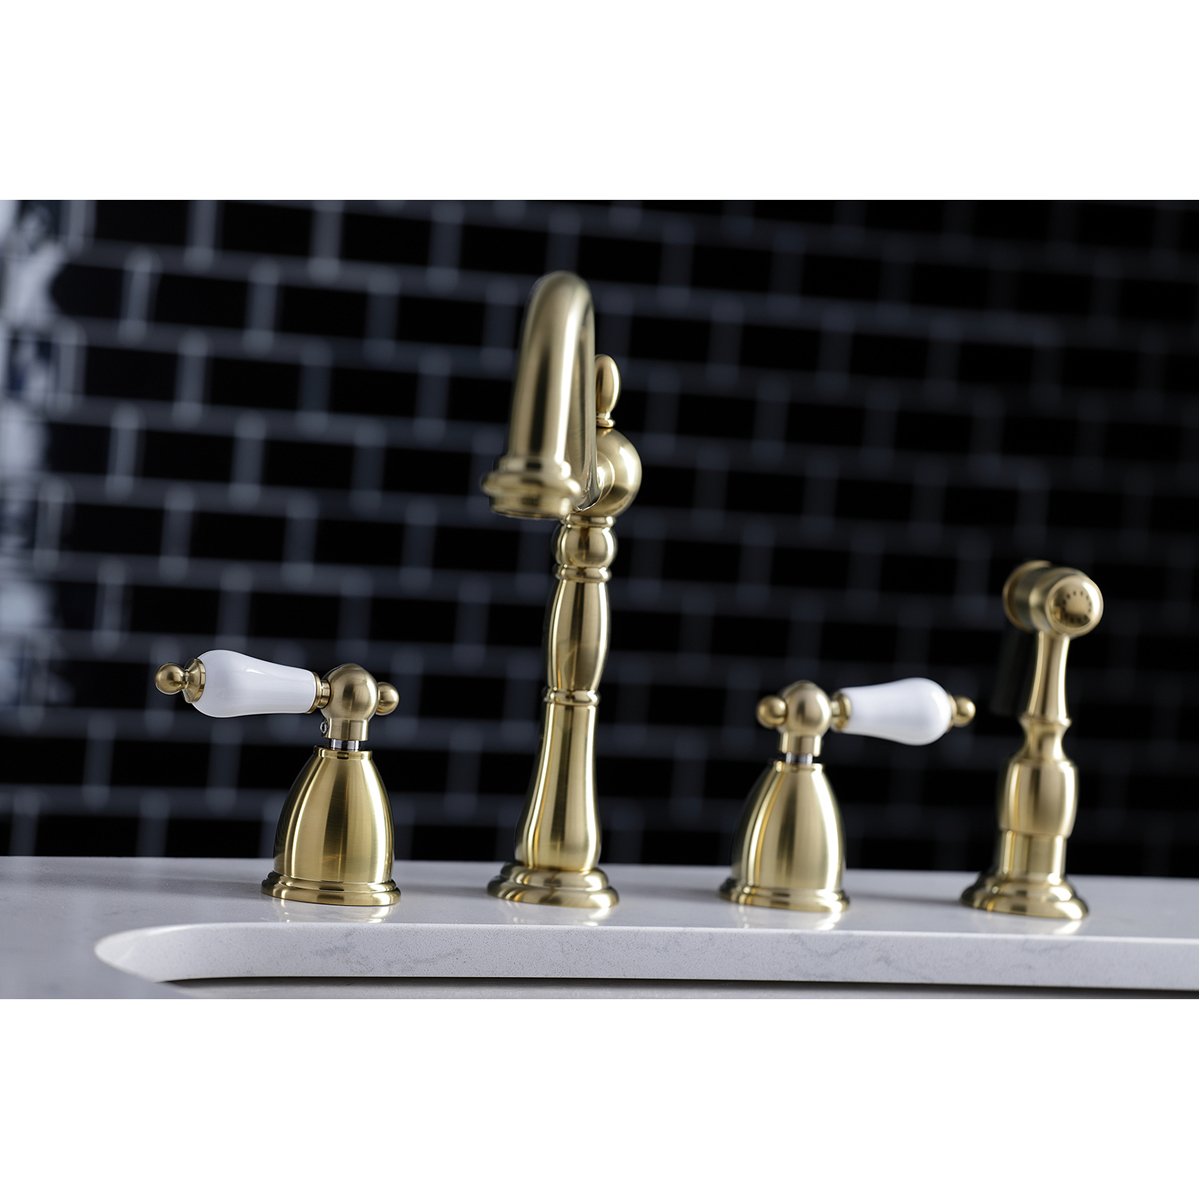 Kingston Brass KB825K5 Chatham Widespread Kitchen Faucet, 9", Oil-Rubbed  Bronze